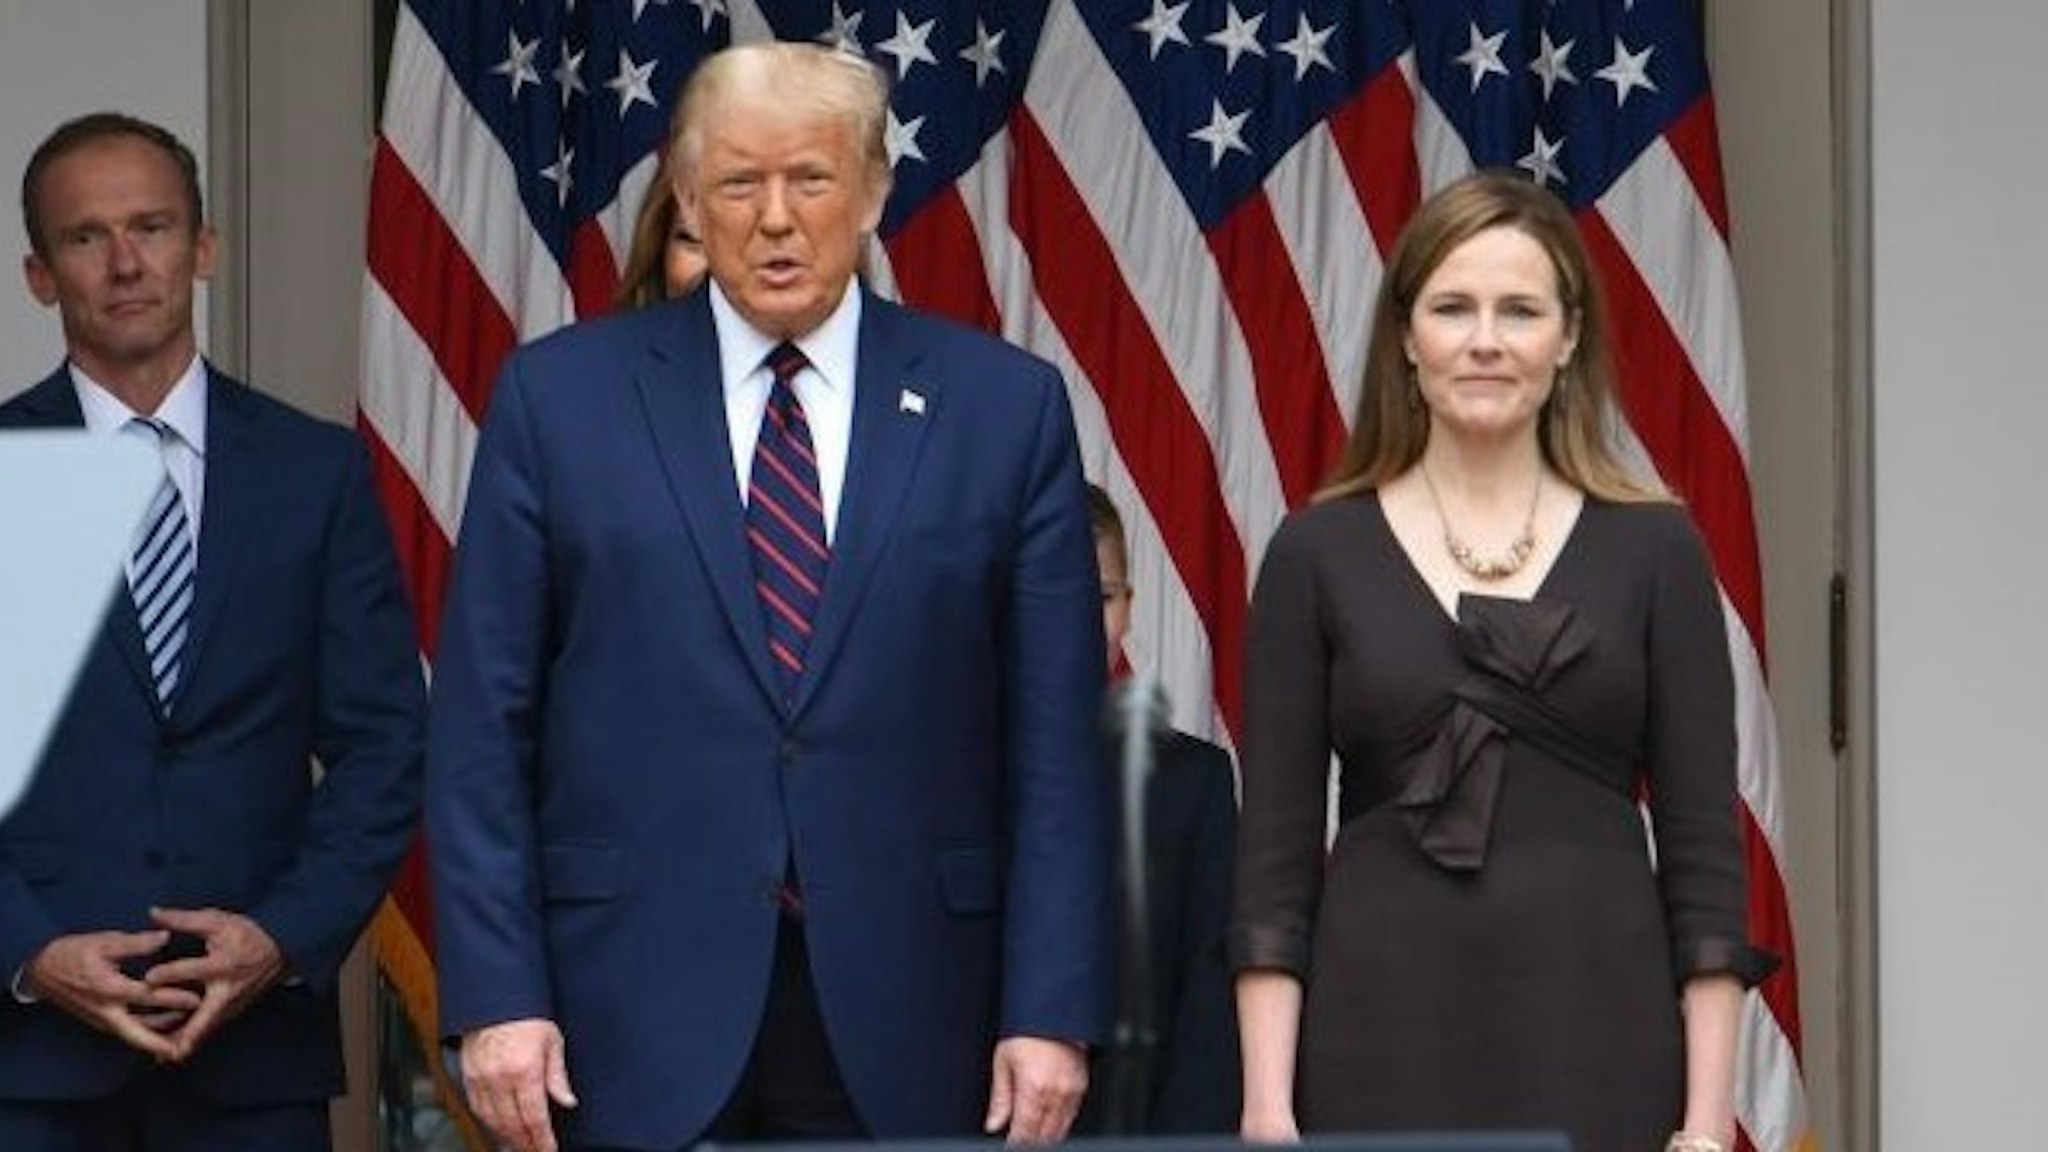 WASHINGTON, DC - SEPTEMBER 26: Amy Coney Barrett (R), U.S. President Donald Trump's nominee for associate justice of the U.S. Supreme Court, and U.S. President Donald Trump arrive for an announcement ceremony at the White House on September 26, 2020 in Washington, DC. (Photo by